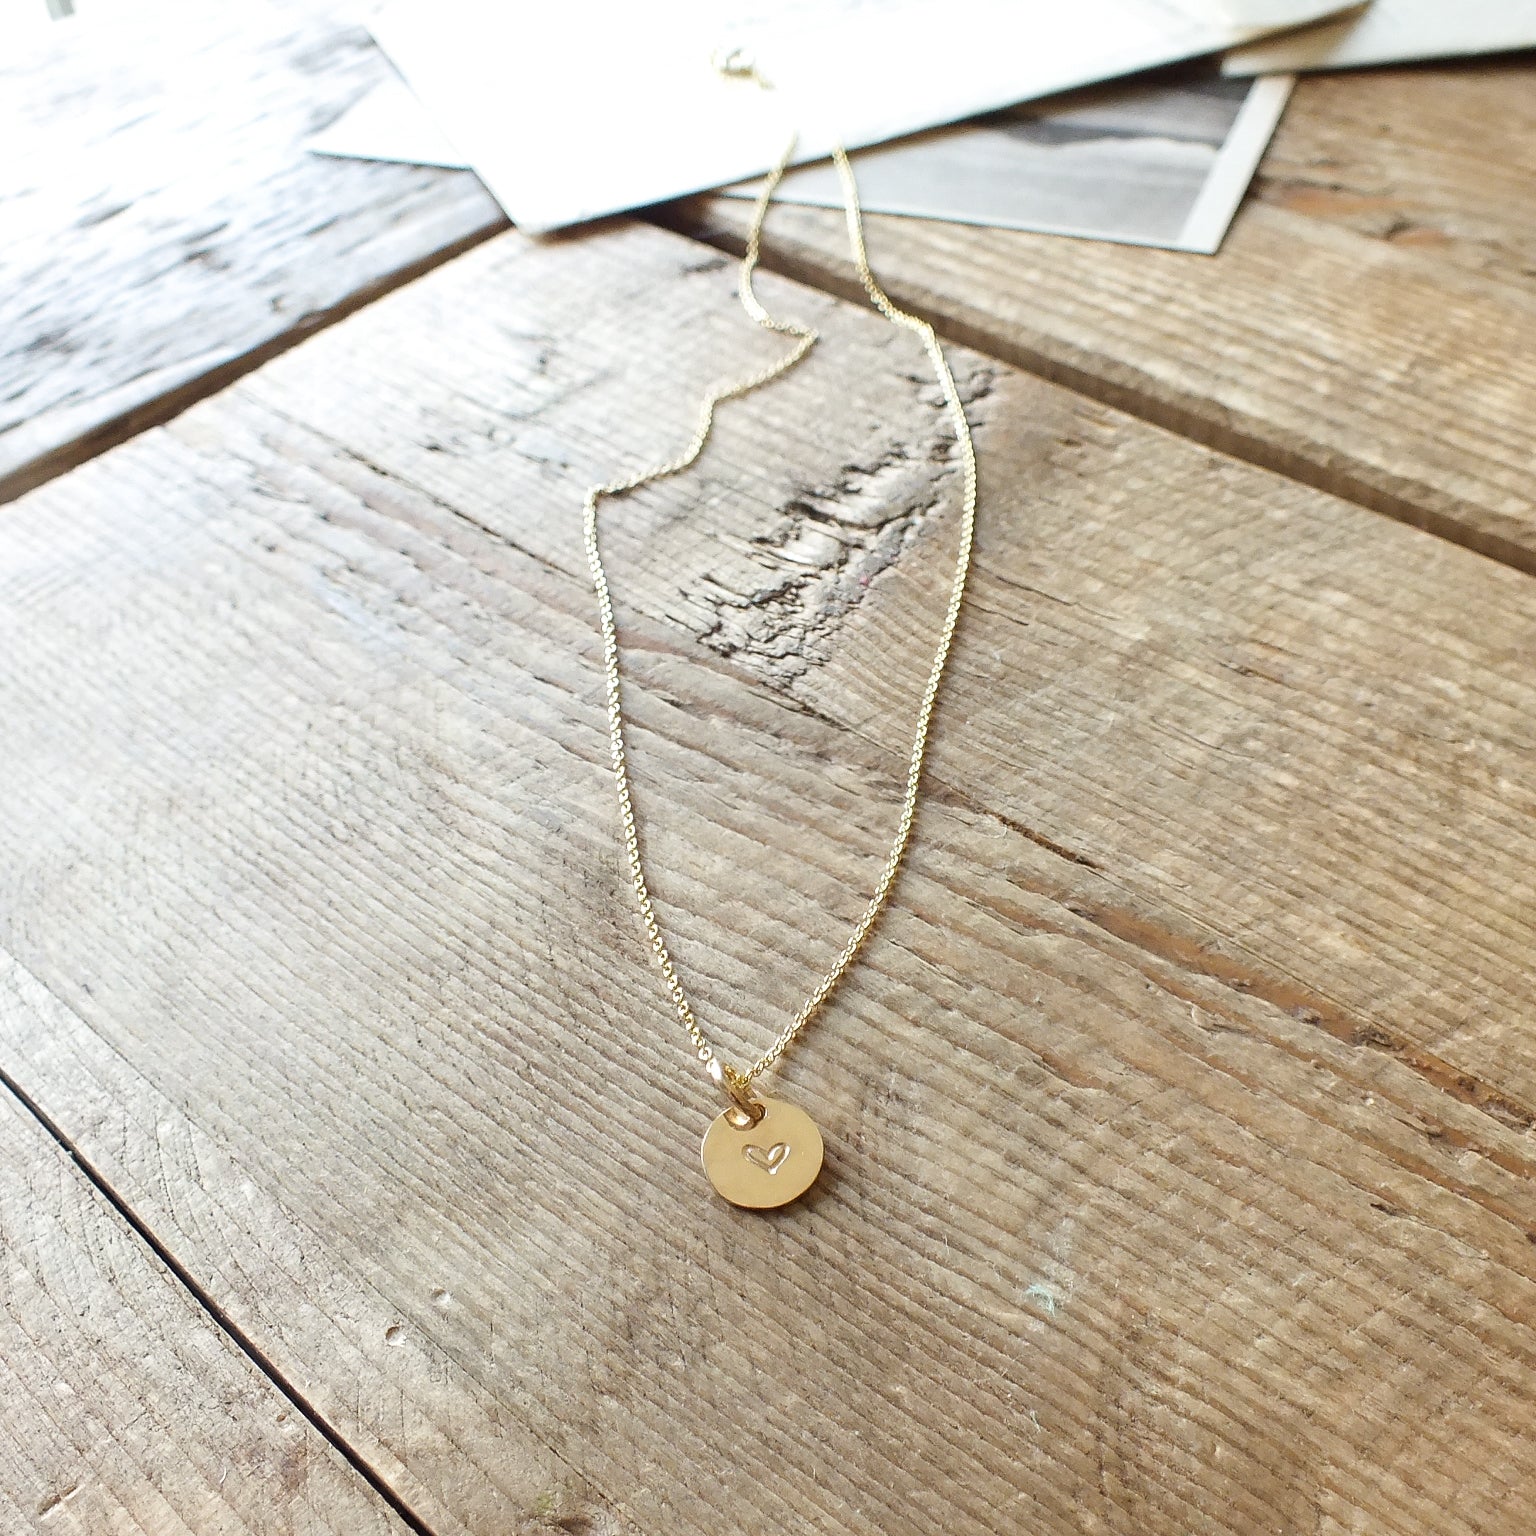 Becoming Jewelry&#39;s Heart Necklace displayed on a wooden surface.